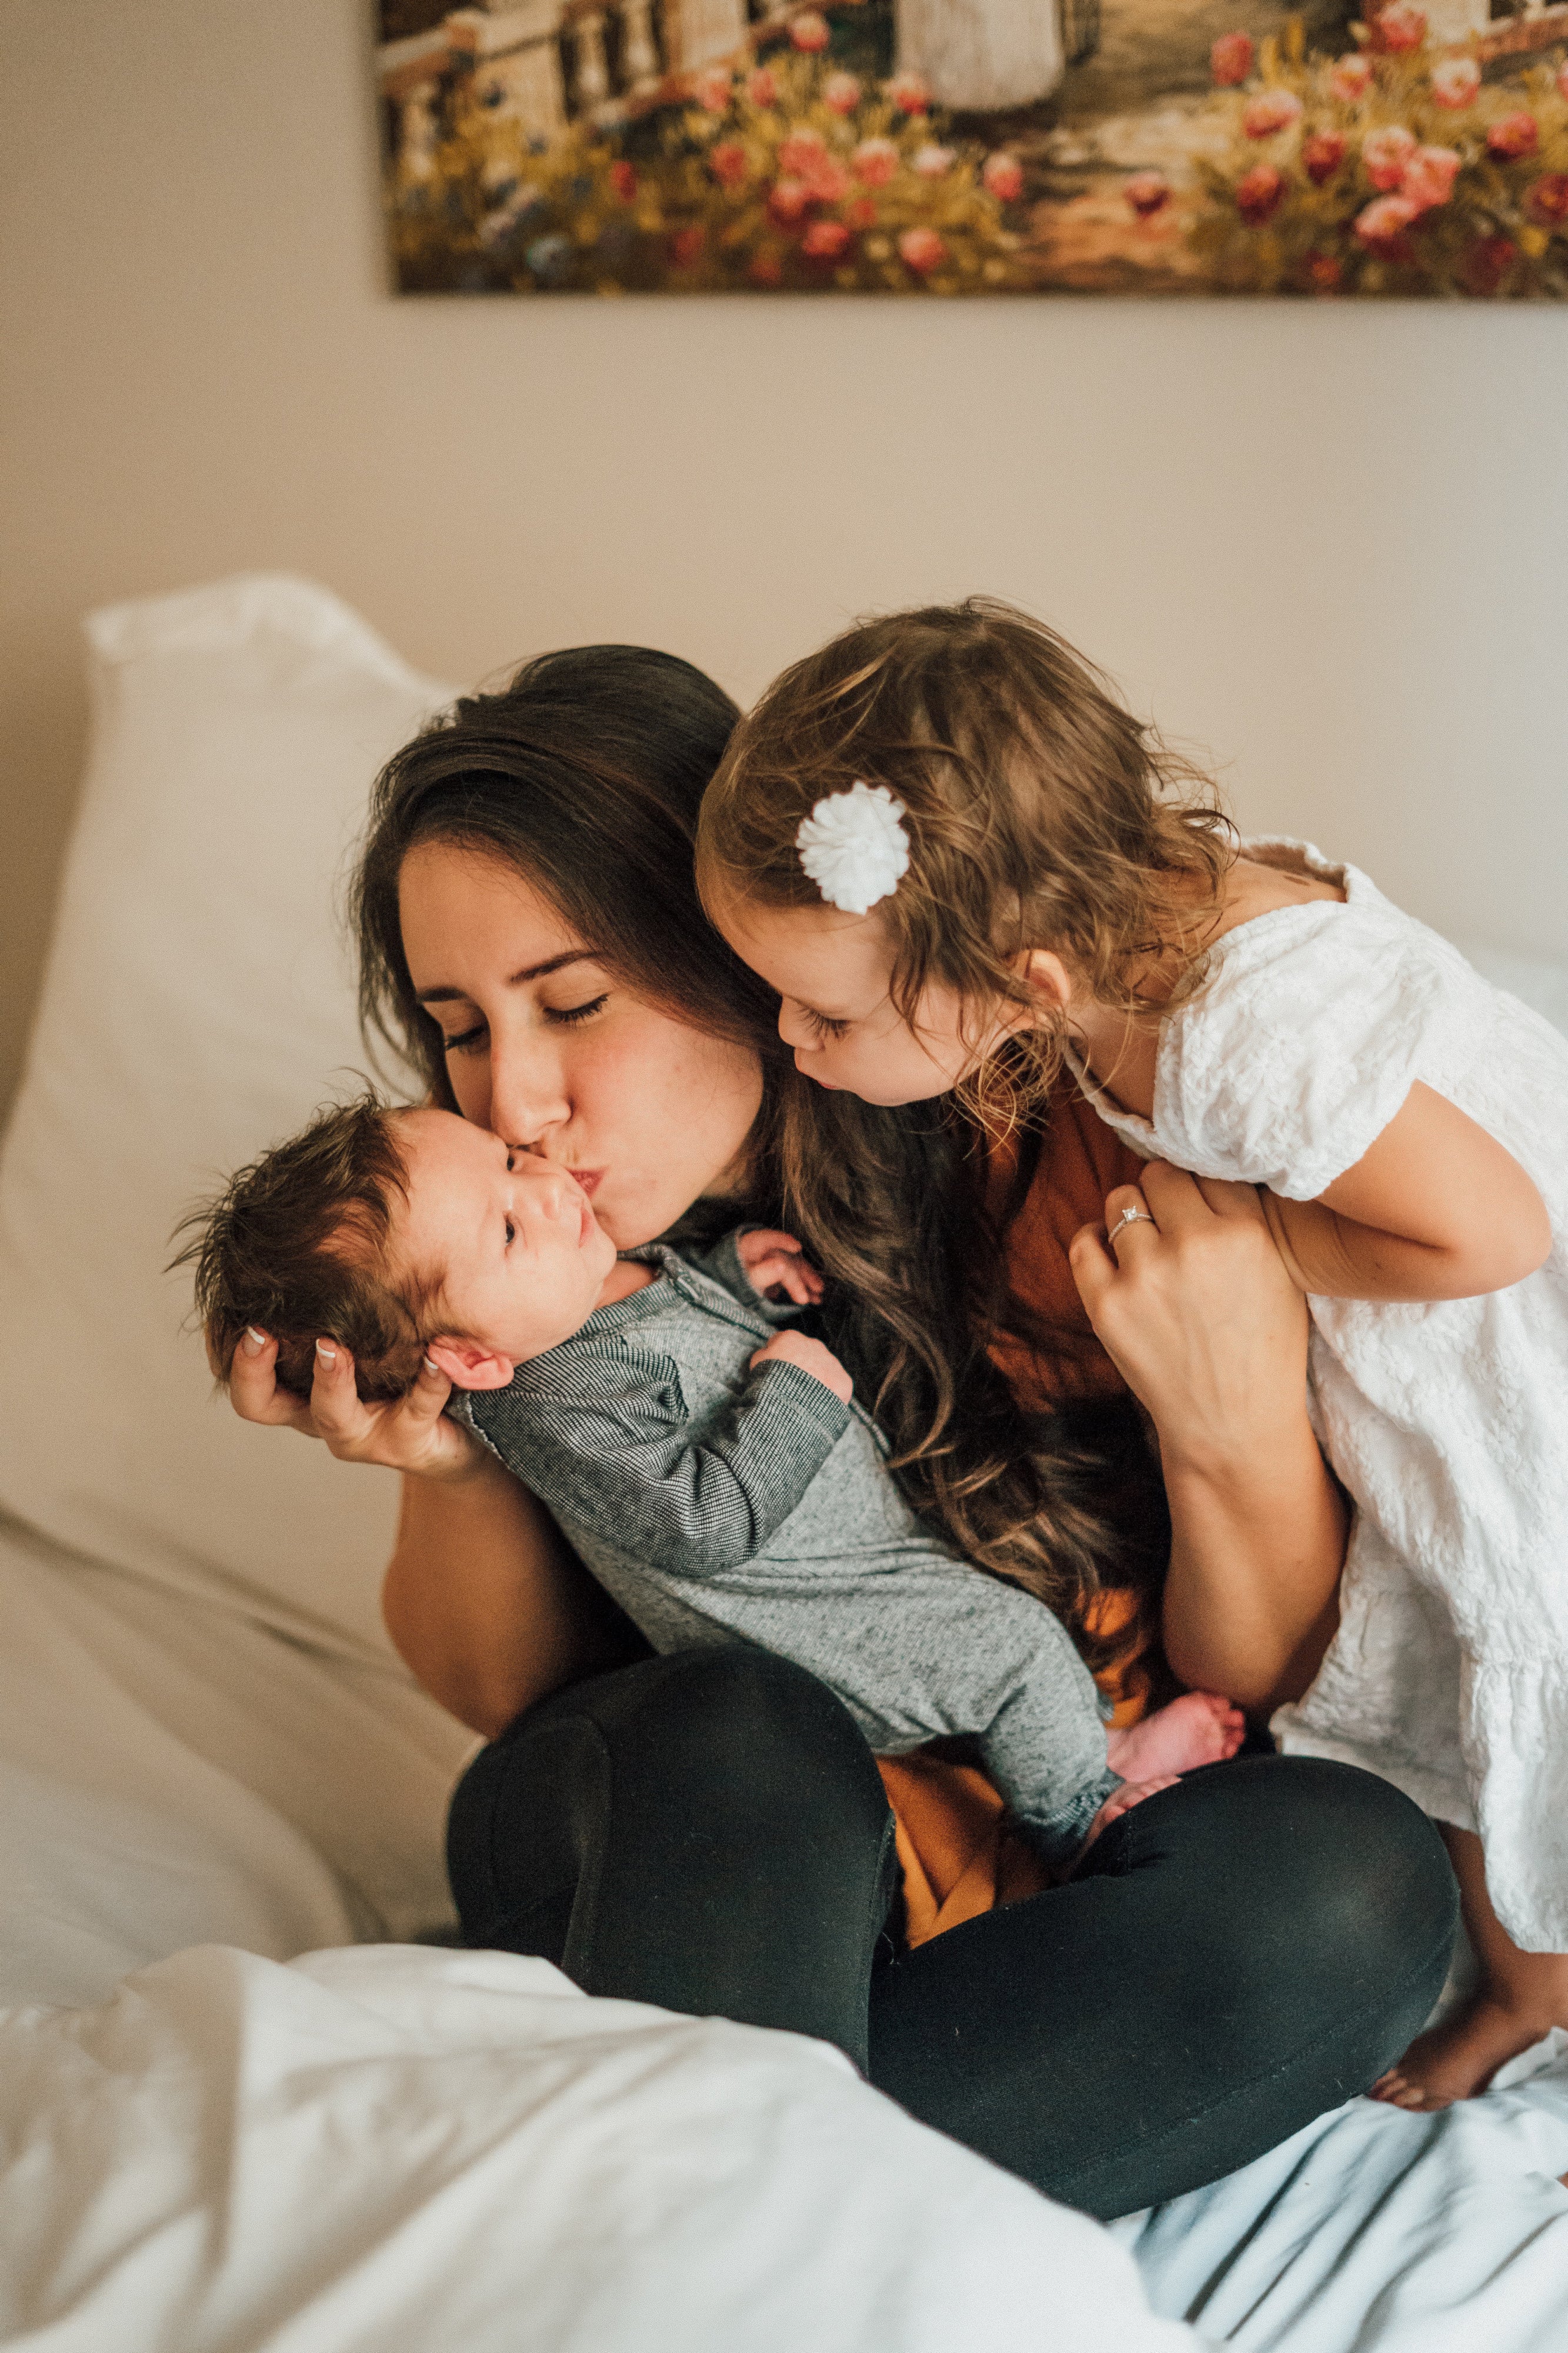 Family Sharing Sweet Moment with Big Sister Kissing Baby Brother